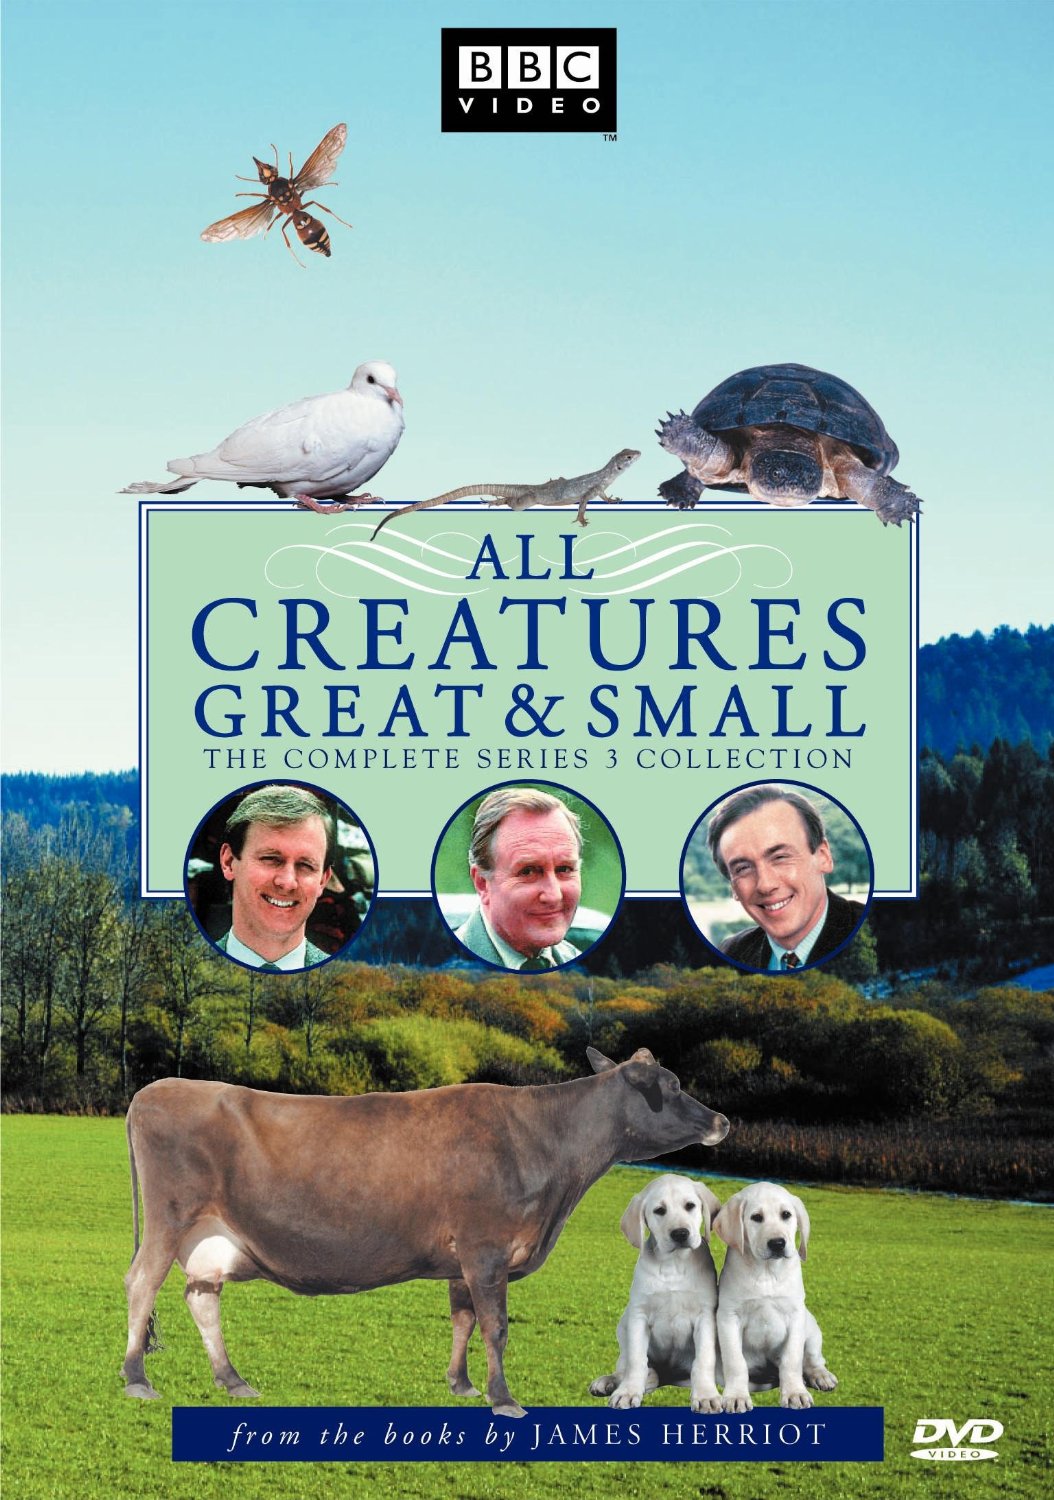 all creatures great and small original